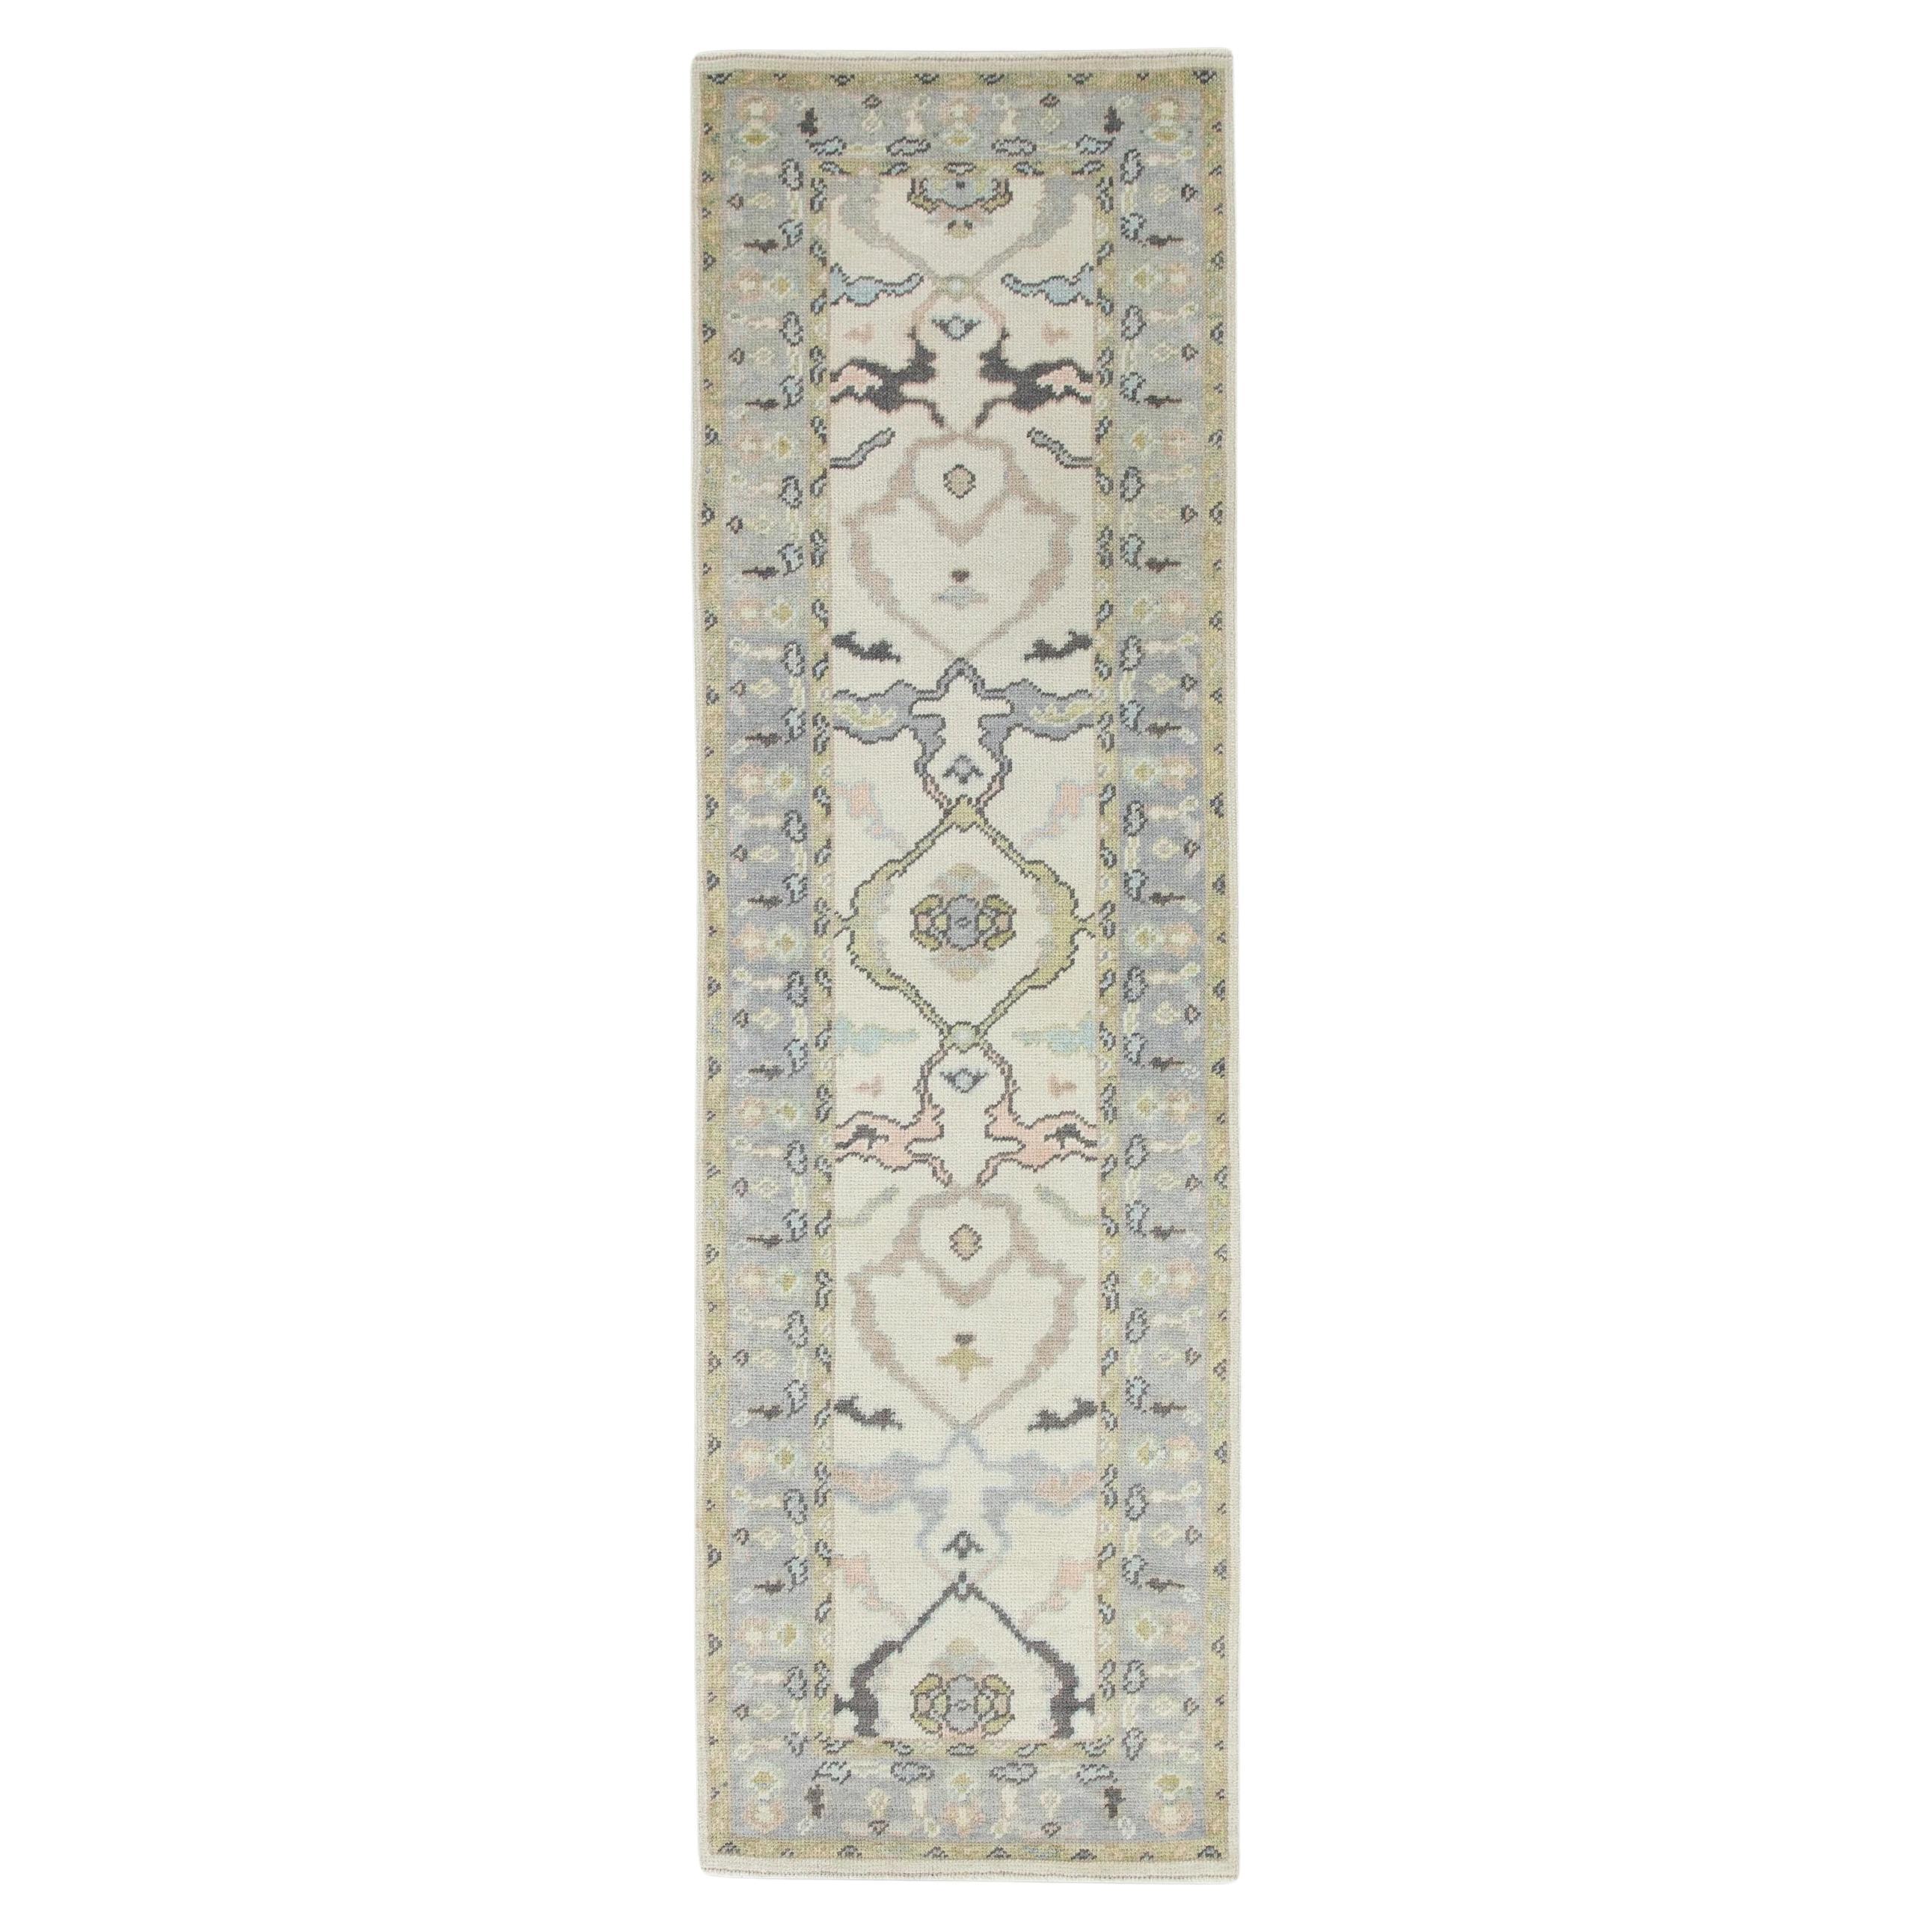 Floral Handwoven Wool Turkish Oushak Rug in Blue, Green, & Pink 2'7" x 8'9"